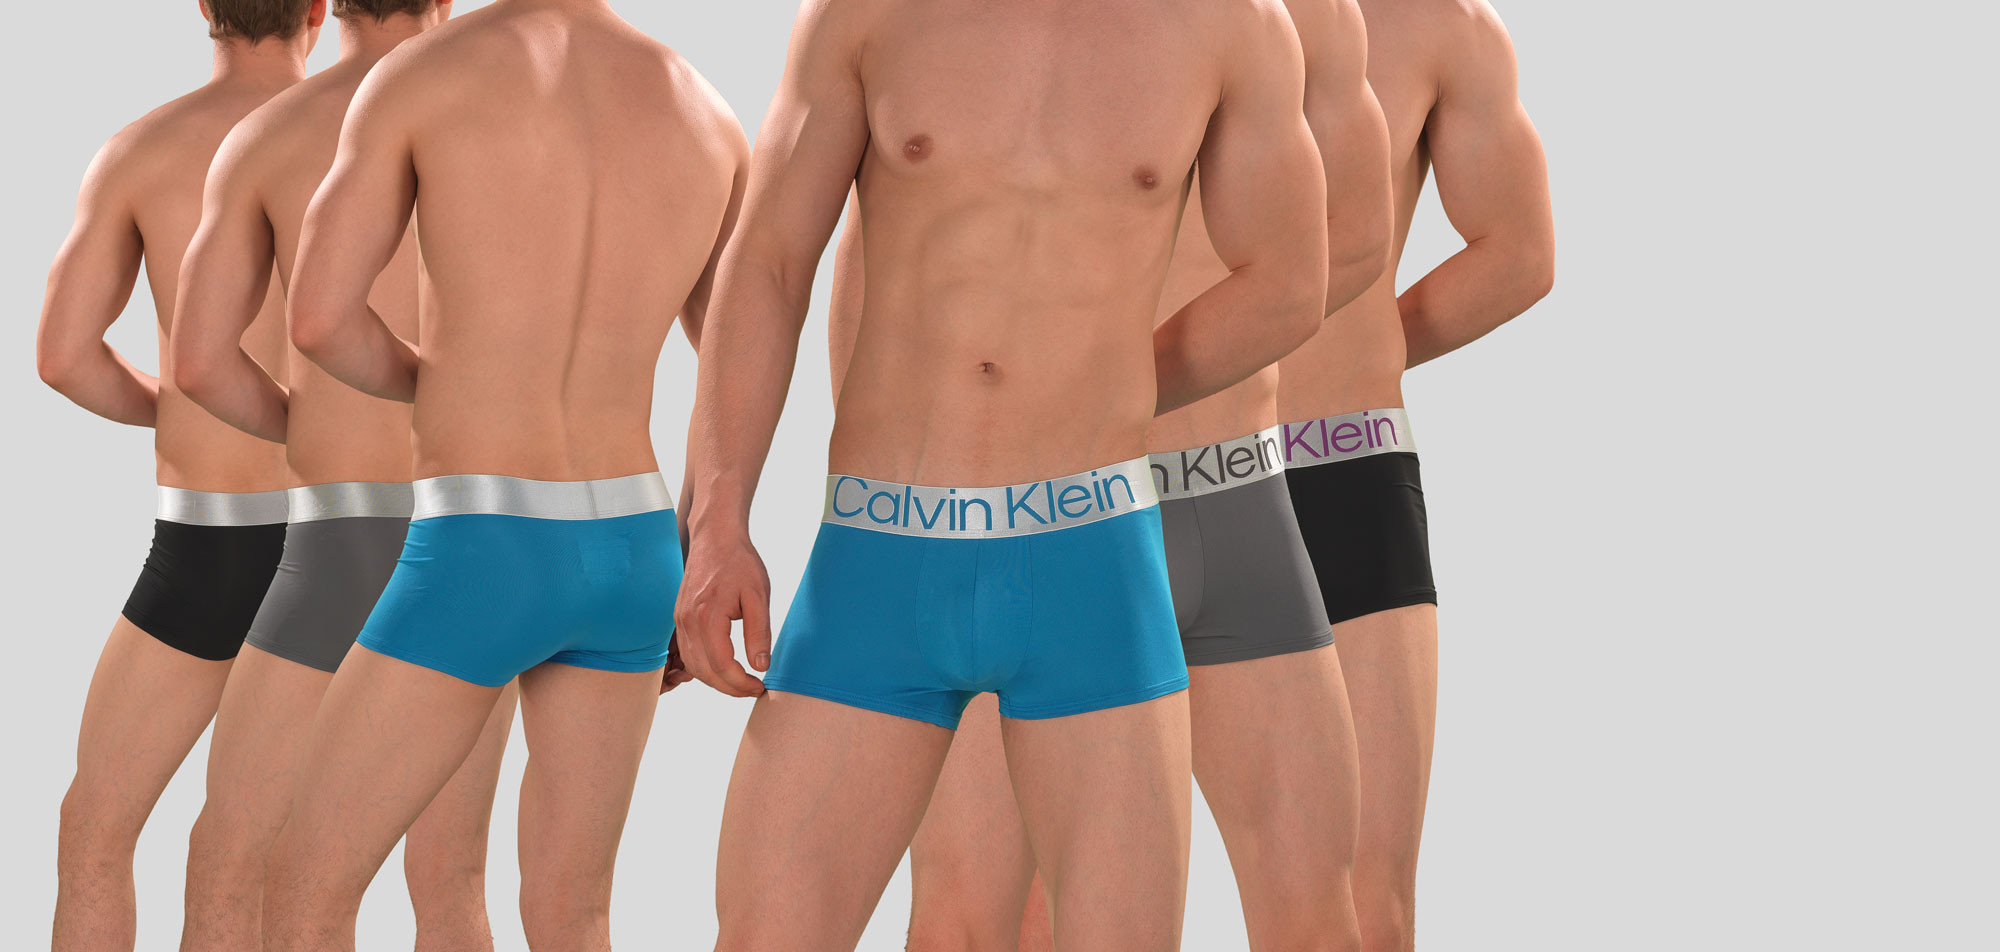 Calvin Klein Low Rise Trunk 3-Pack NB3074A Microfiber Reconsidered Steel,